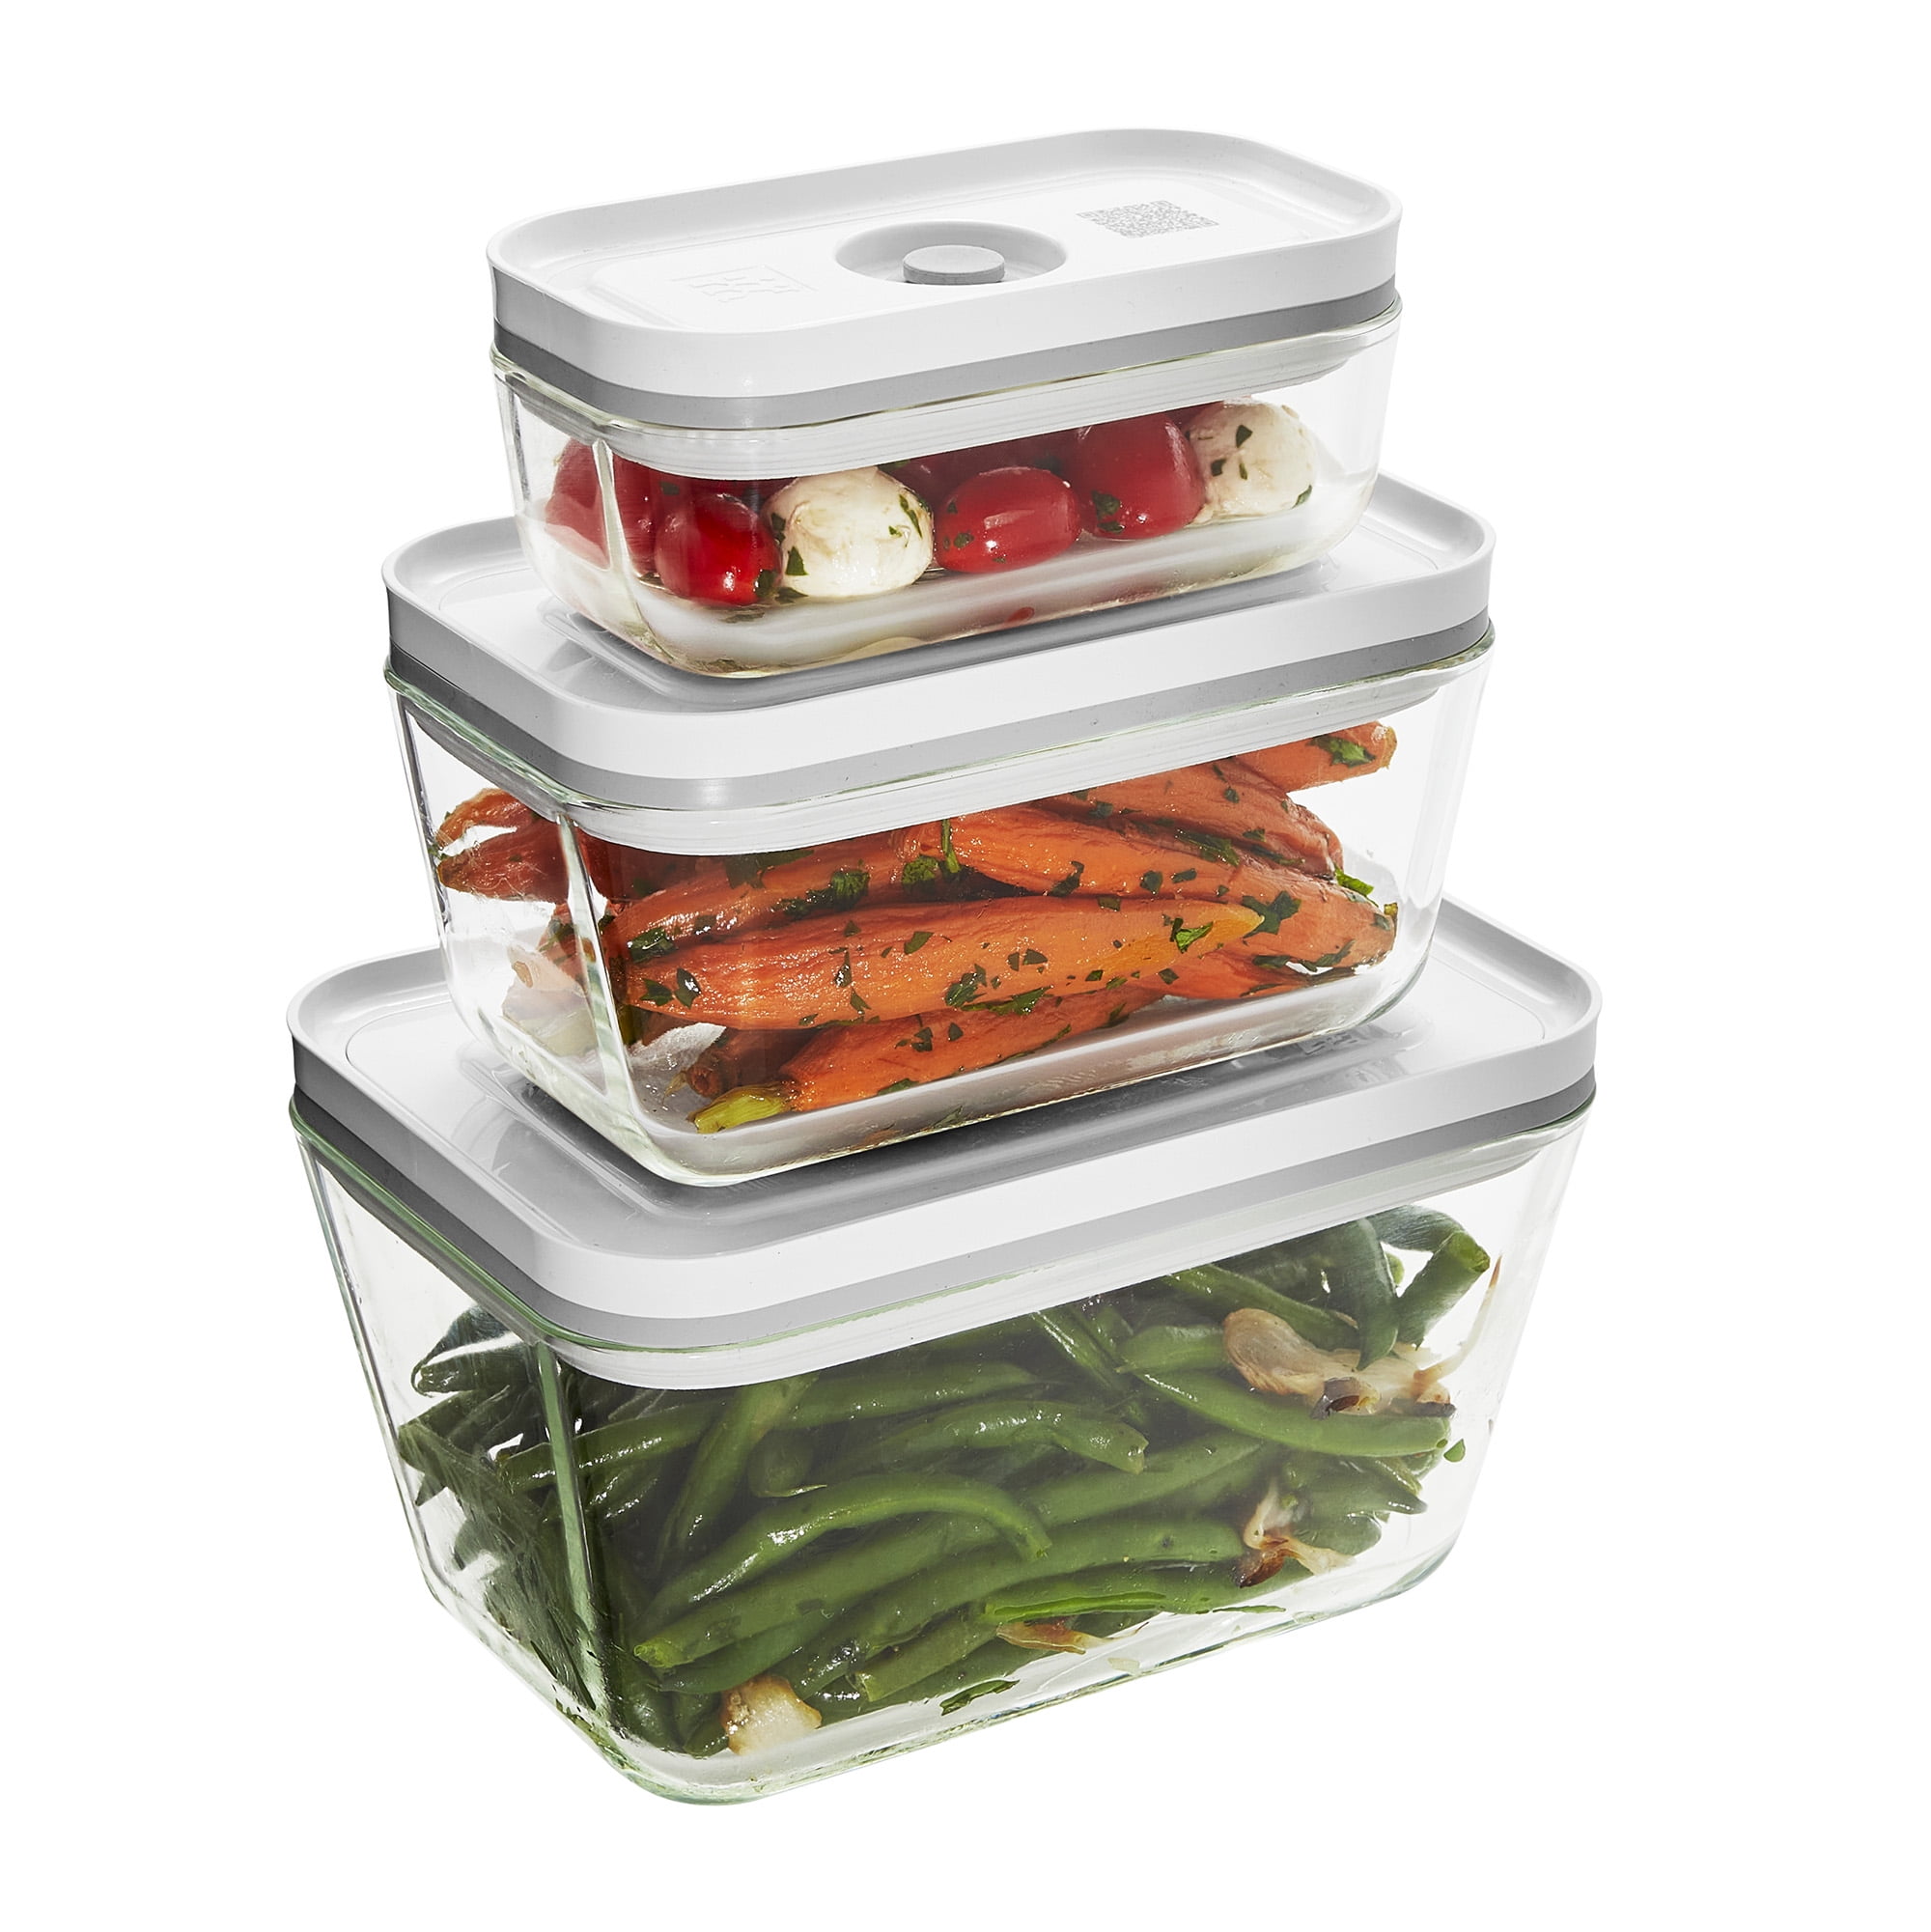  Vacucraft Plastic Food Storage Containers with Airtight Lids -  Assorted - 5 Pack - Great for Vegatables, Fruits and Meats - Keeps Food  Fresh Longer - Vacuum Seal Containers for Food